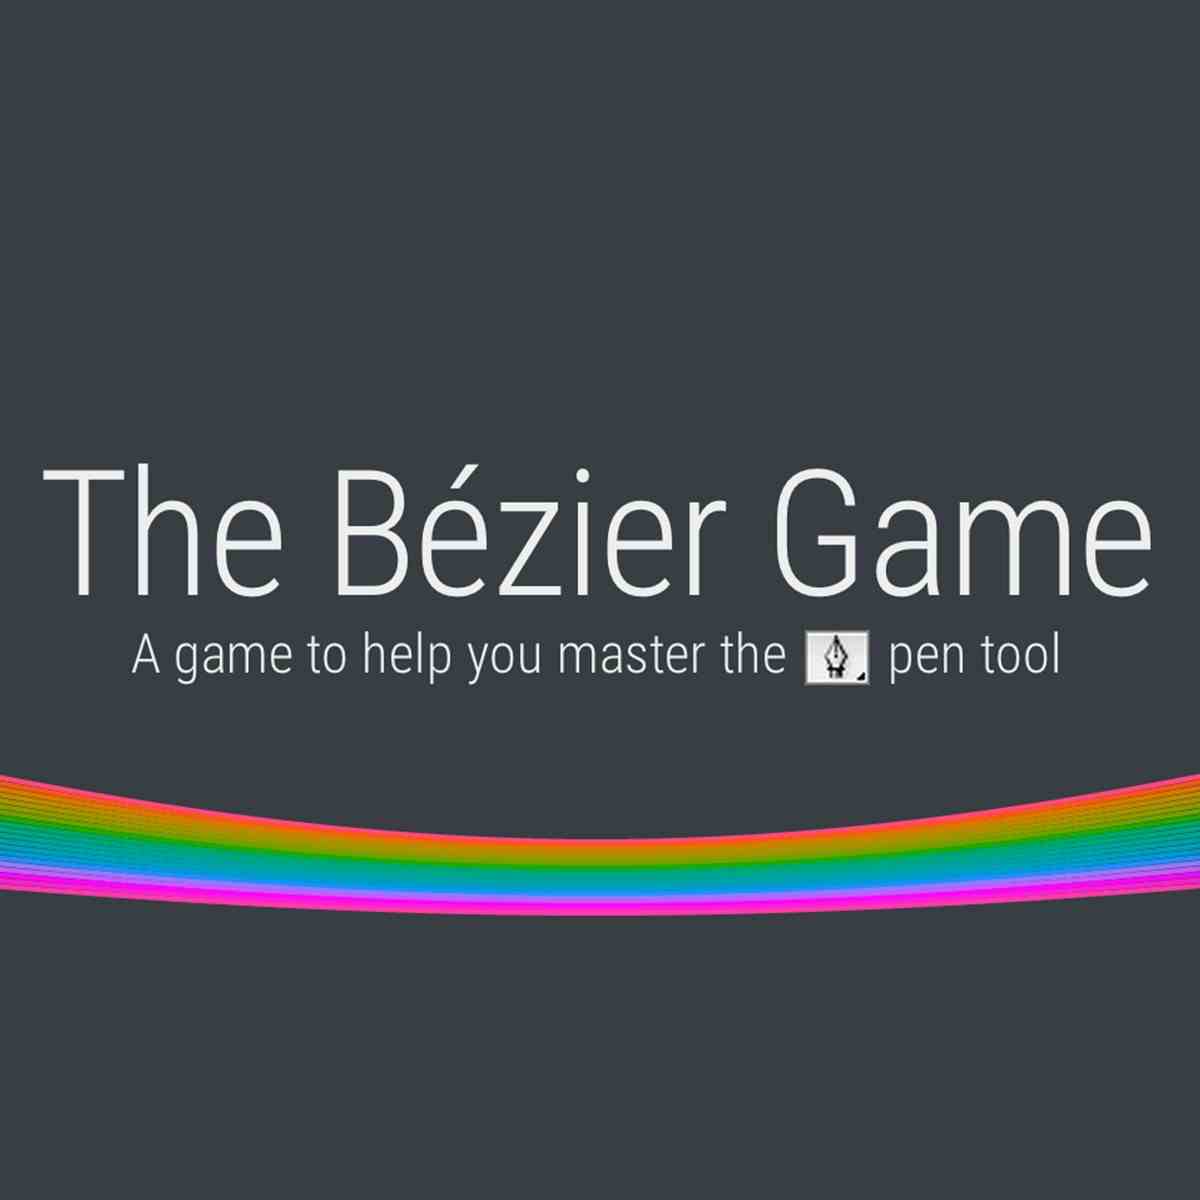 The Bezier Game logo